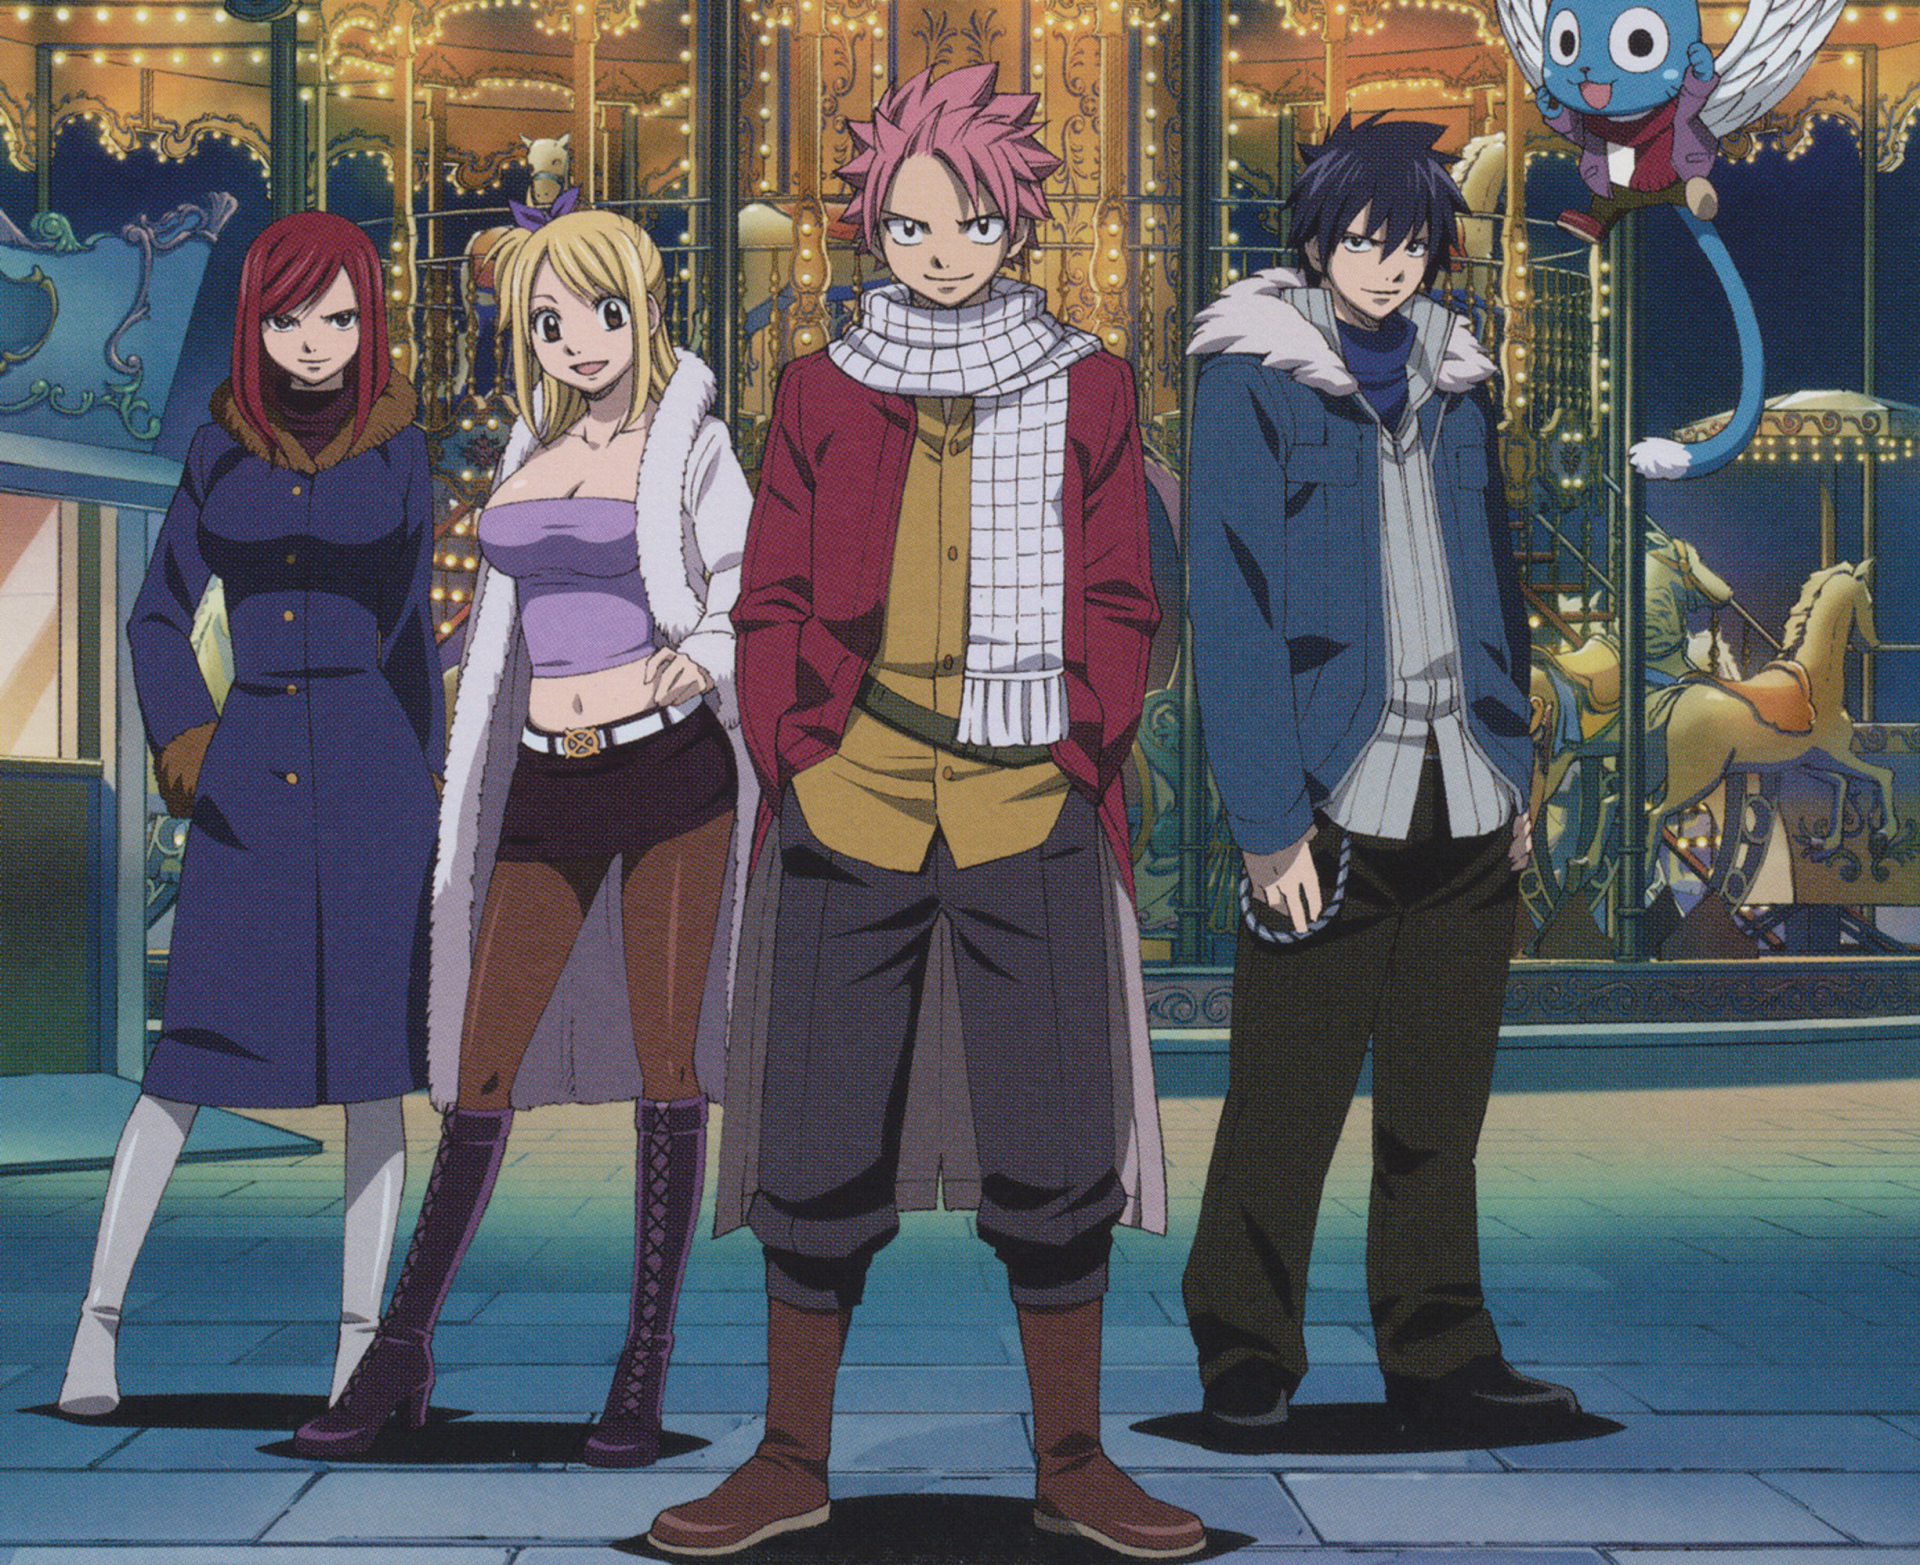 Anime Fairy Tail Lucy Heartfilia Natsu Dragneel Erza Scarlet Gray Fullbuster Happy (Fairy Tail) Wallpaper. Fairy tail gray, Fairy tail anime, Fairy tail guild